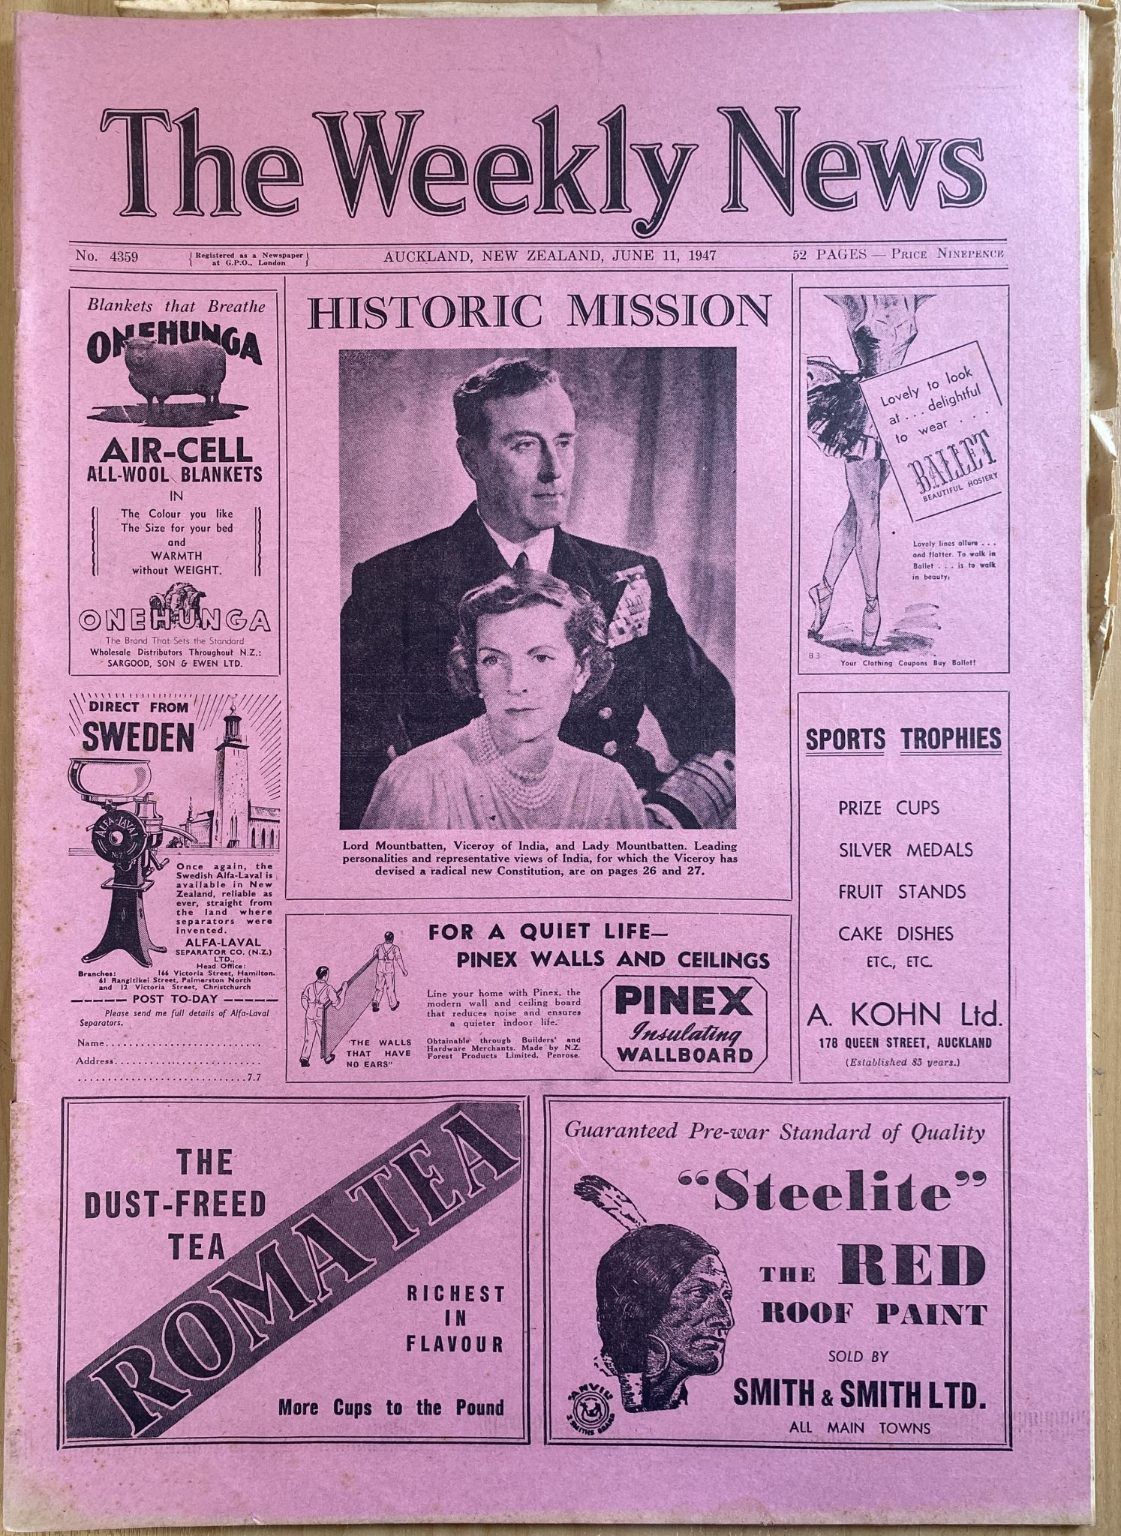 OLD NEWSPAPER: The Weekly News, No. 4359, 11 June 1947